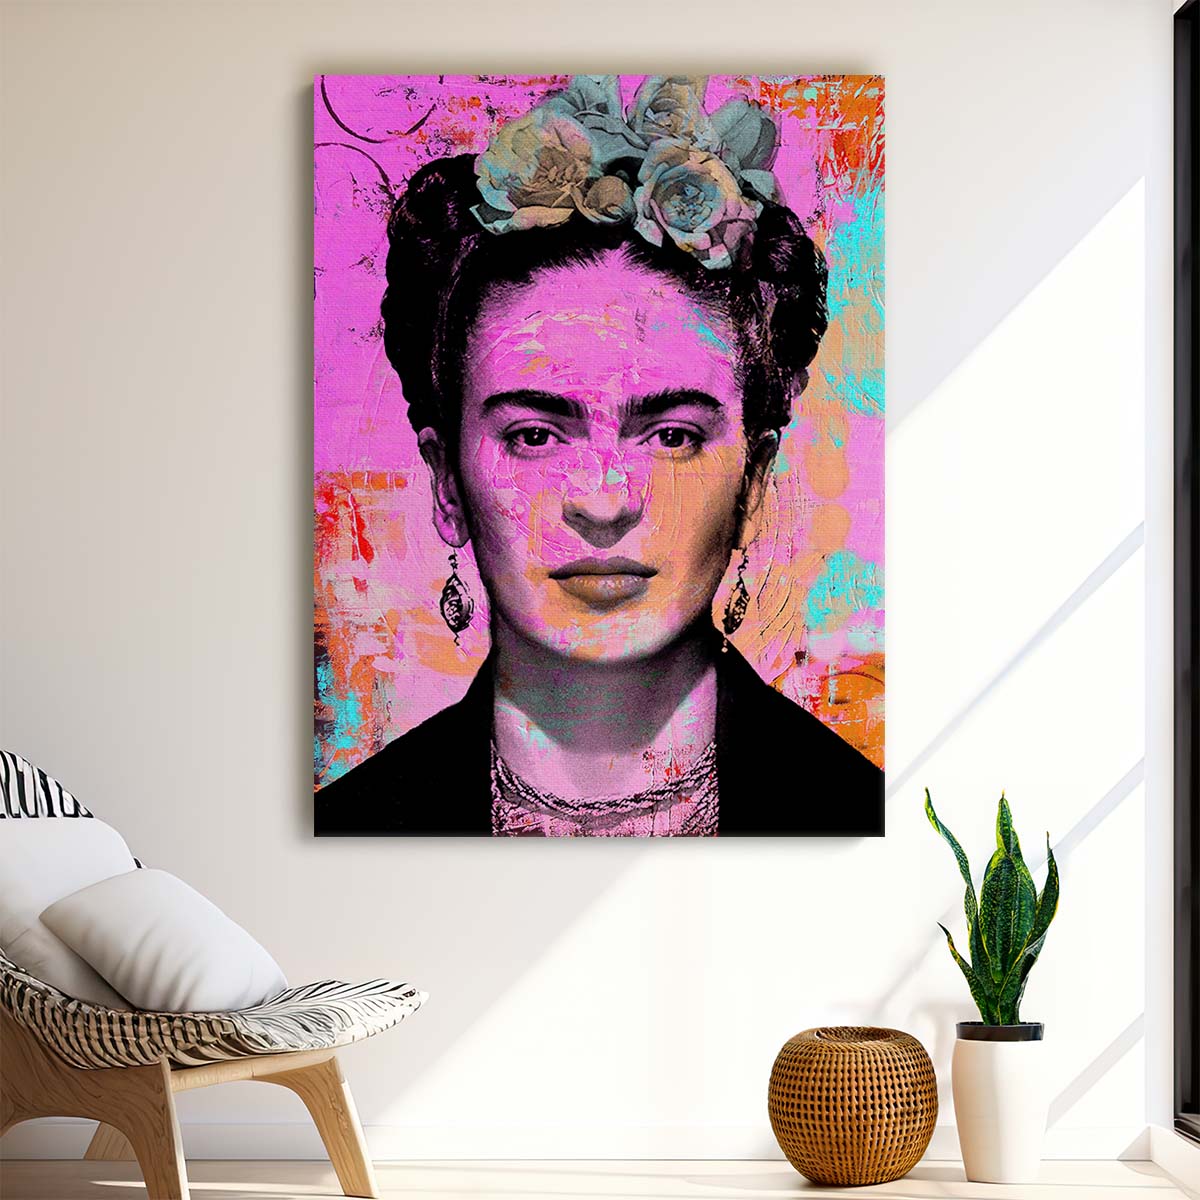 Frida Kahlo Portrait Circles Graffiti Wall Art by Luxuriance Designs. Made in USA.